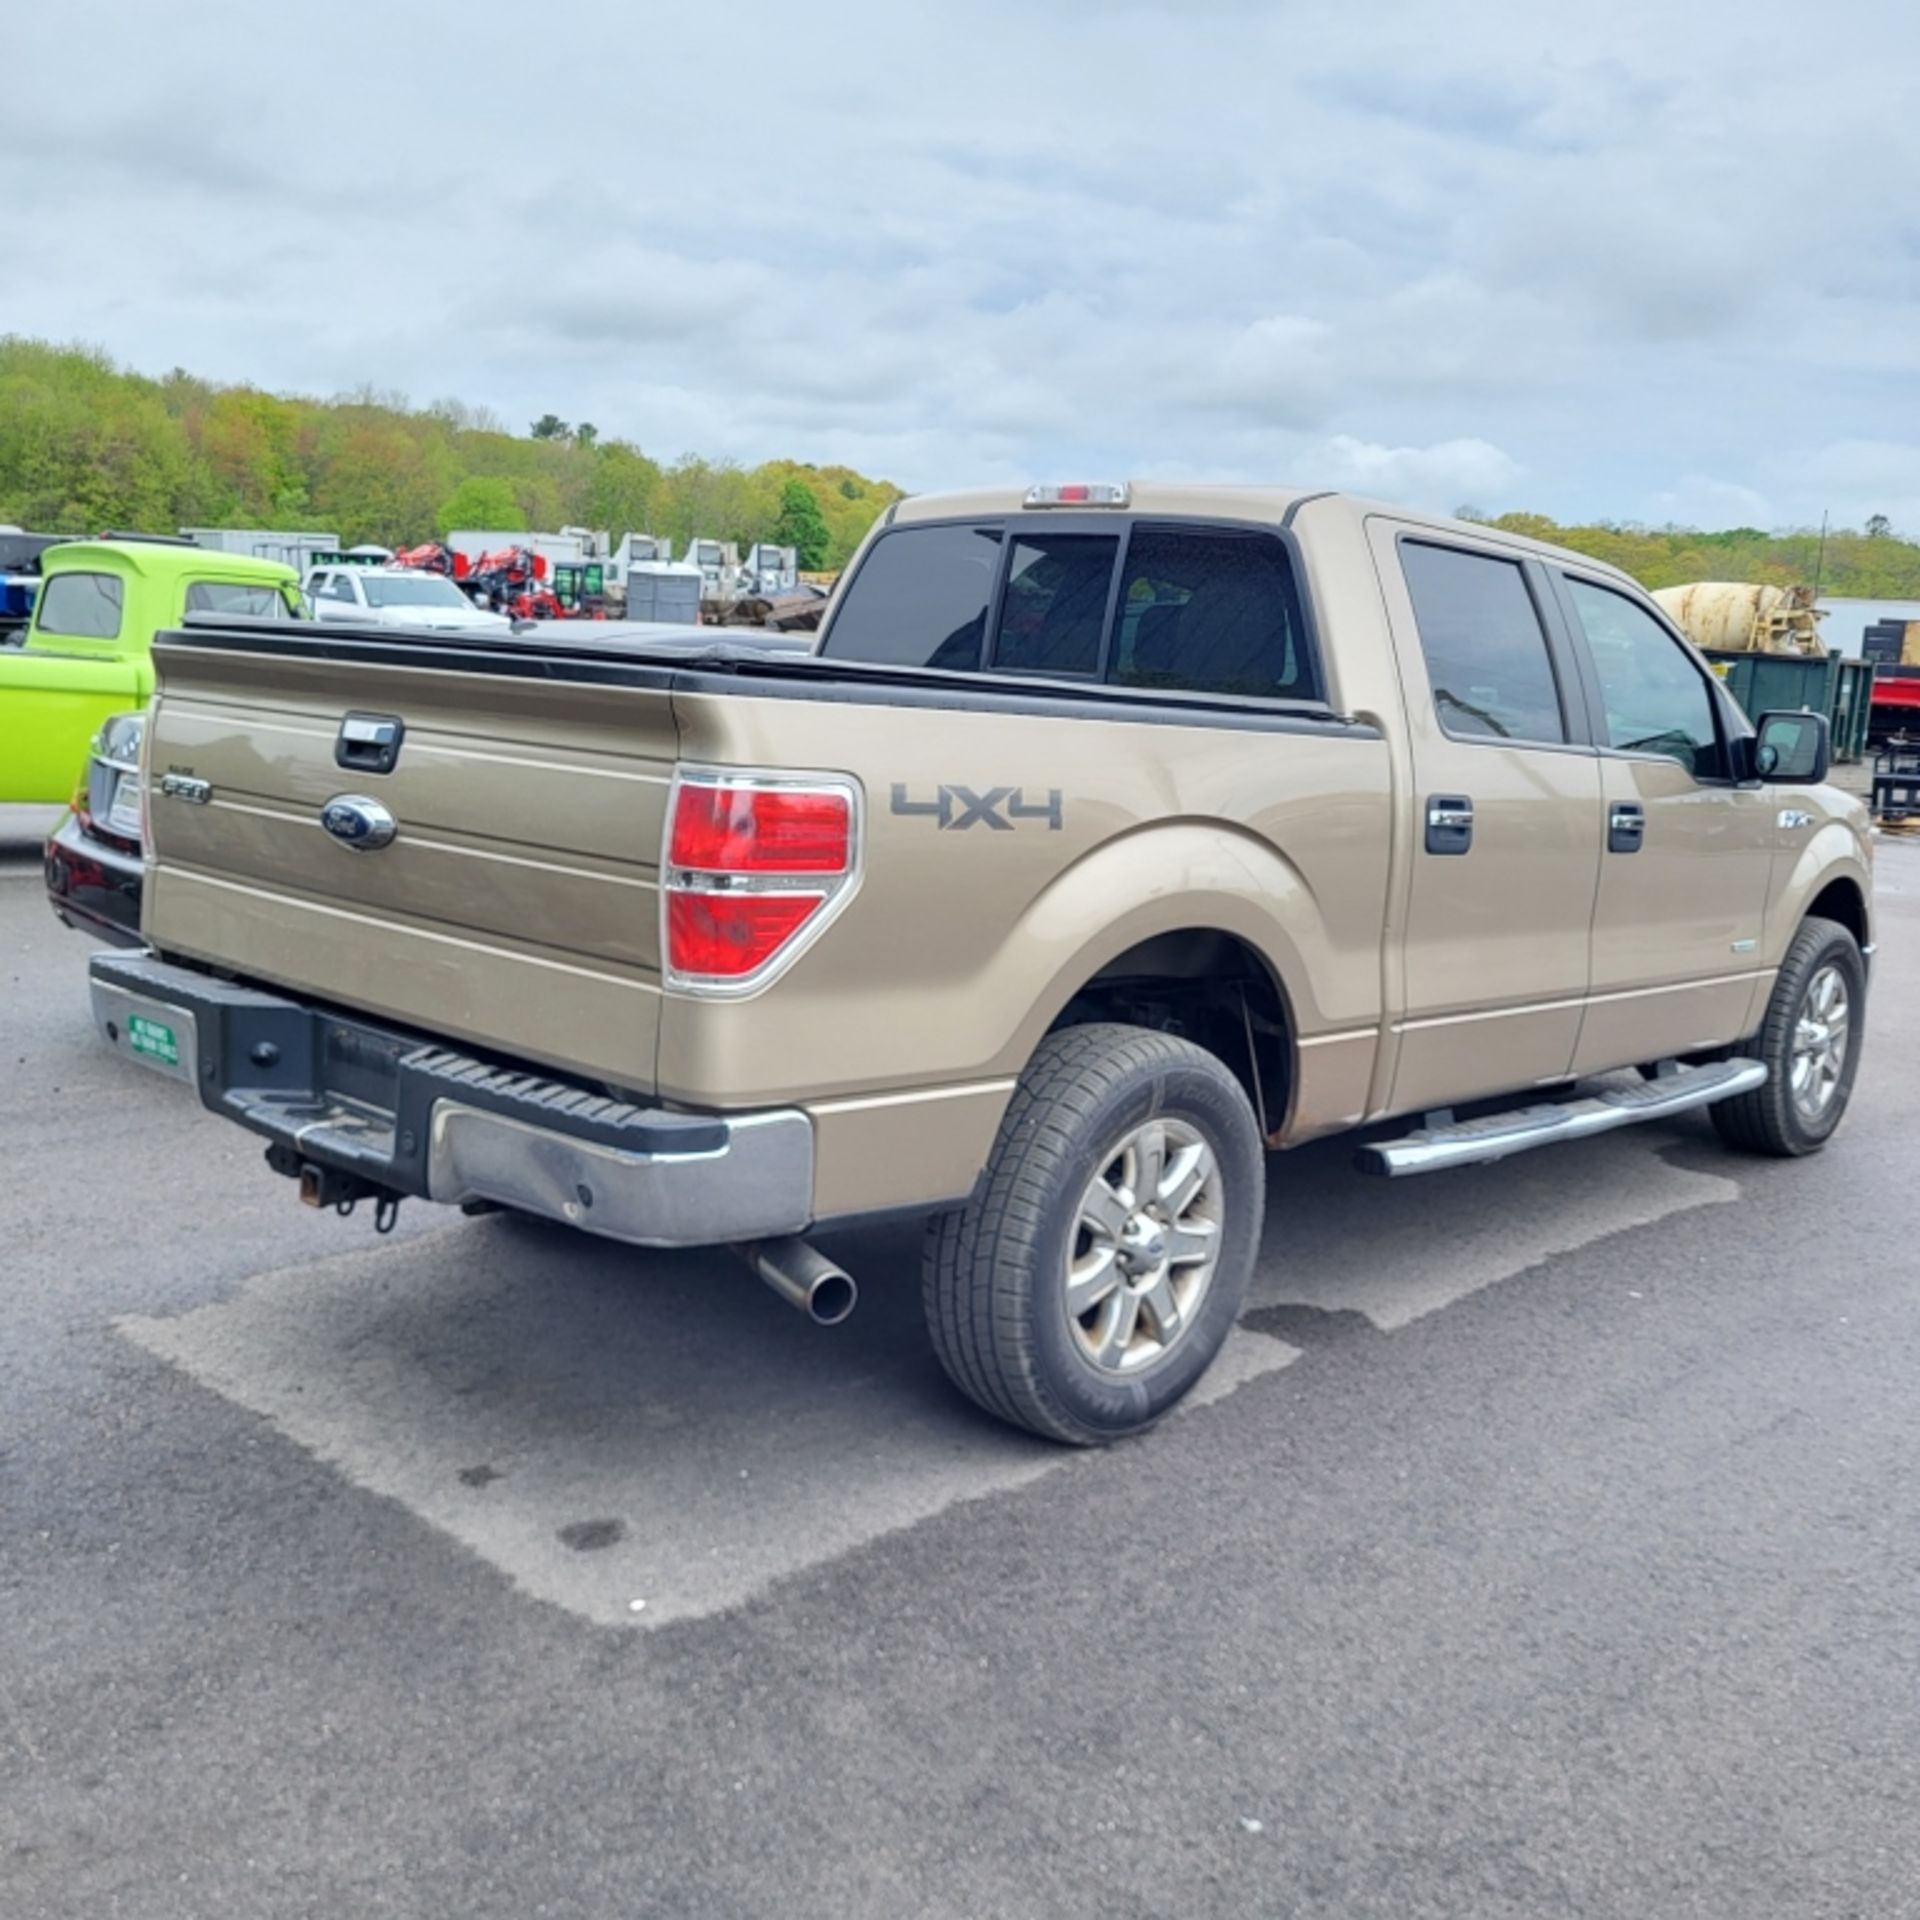 2014 Ford F150 Pickup - Image 2 of 20